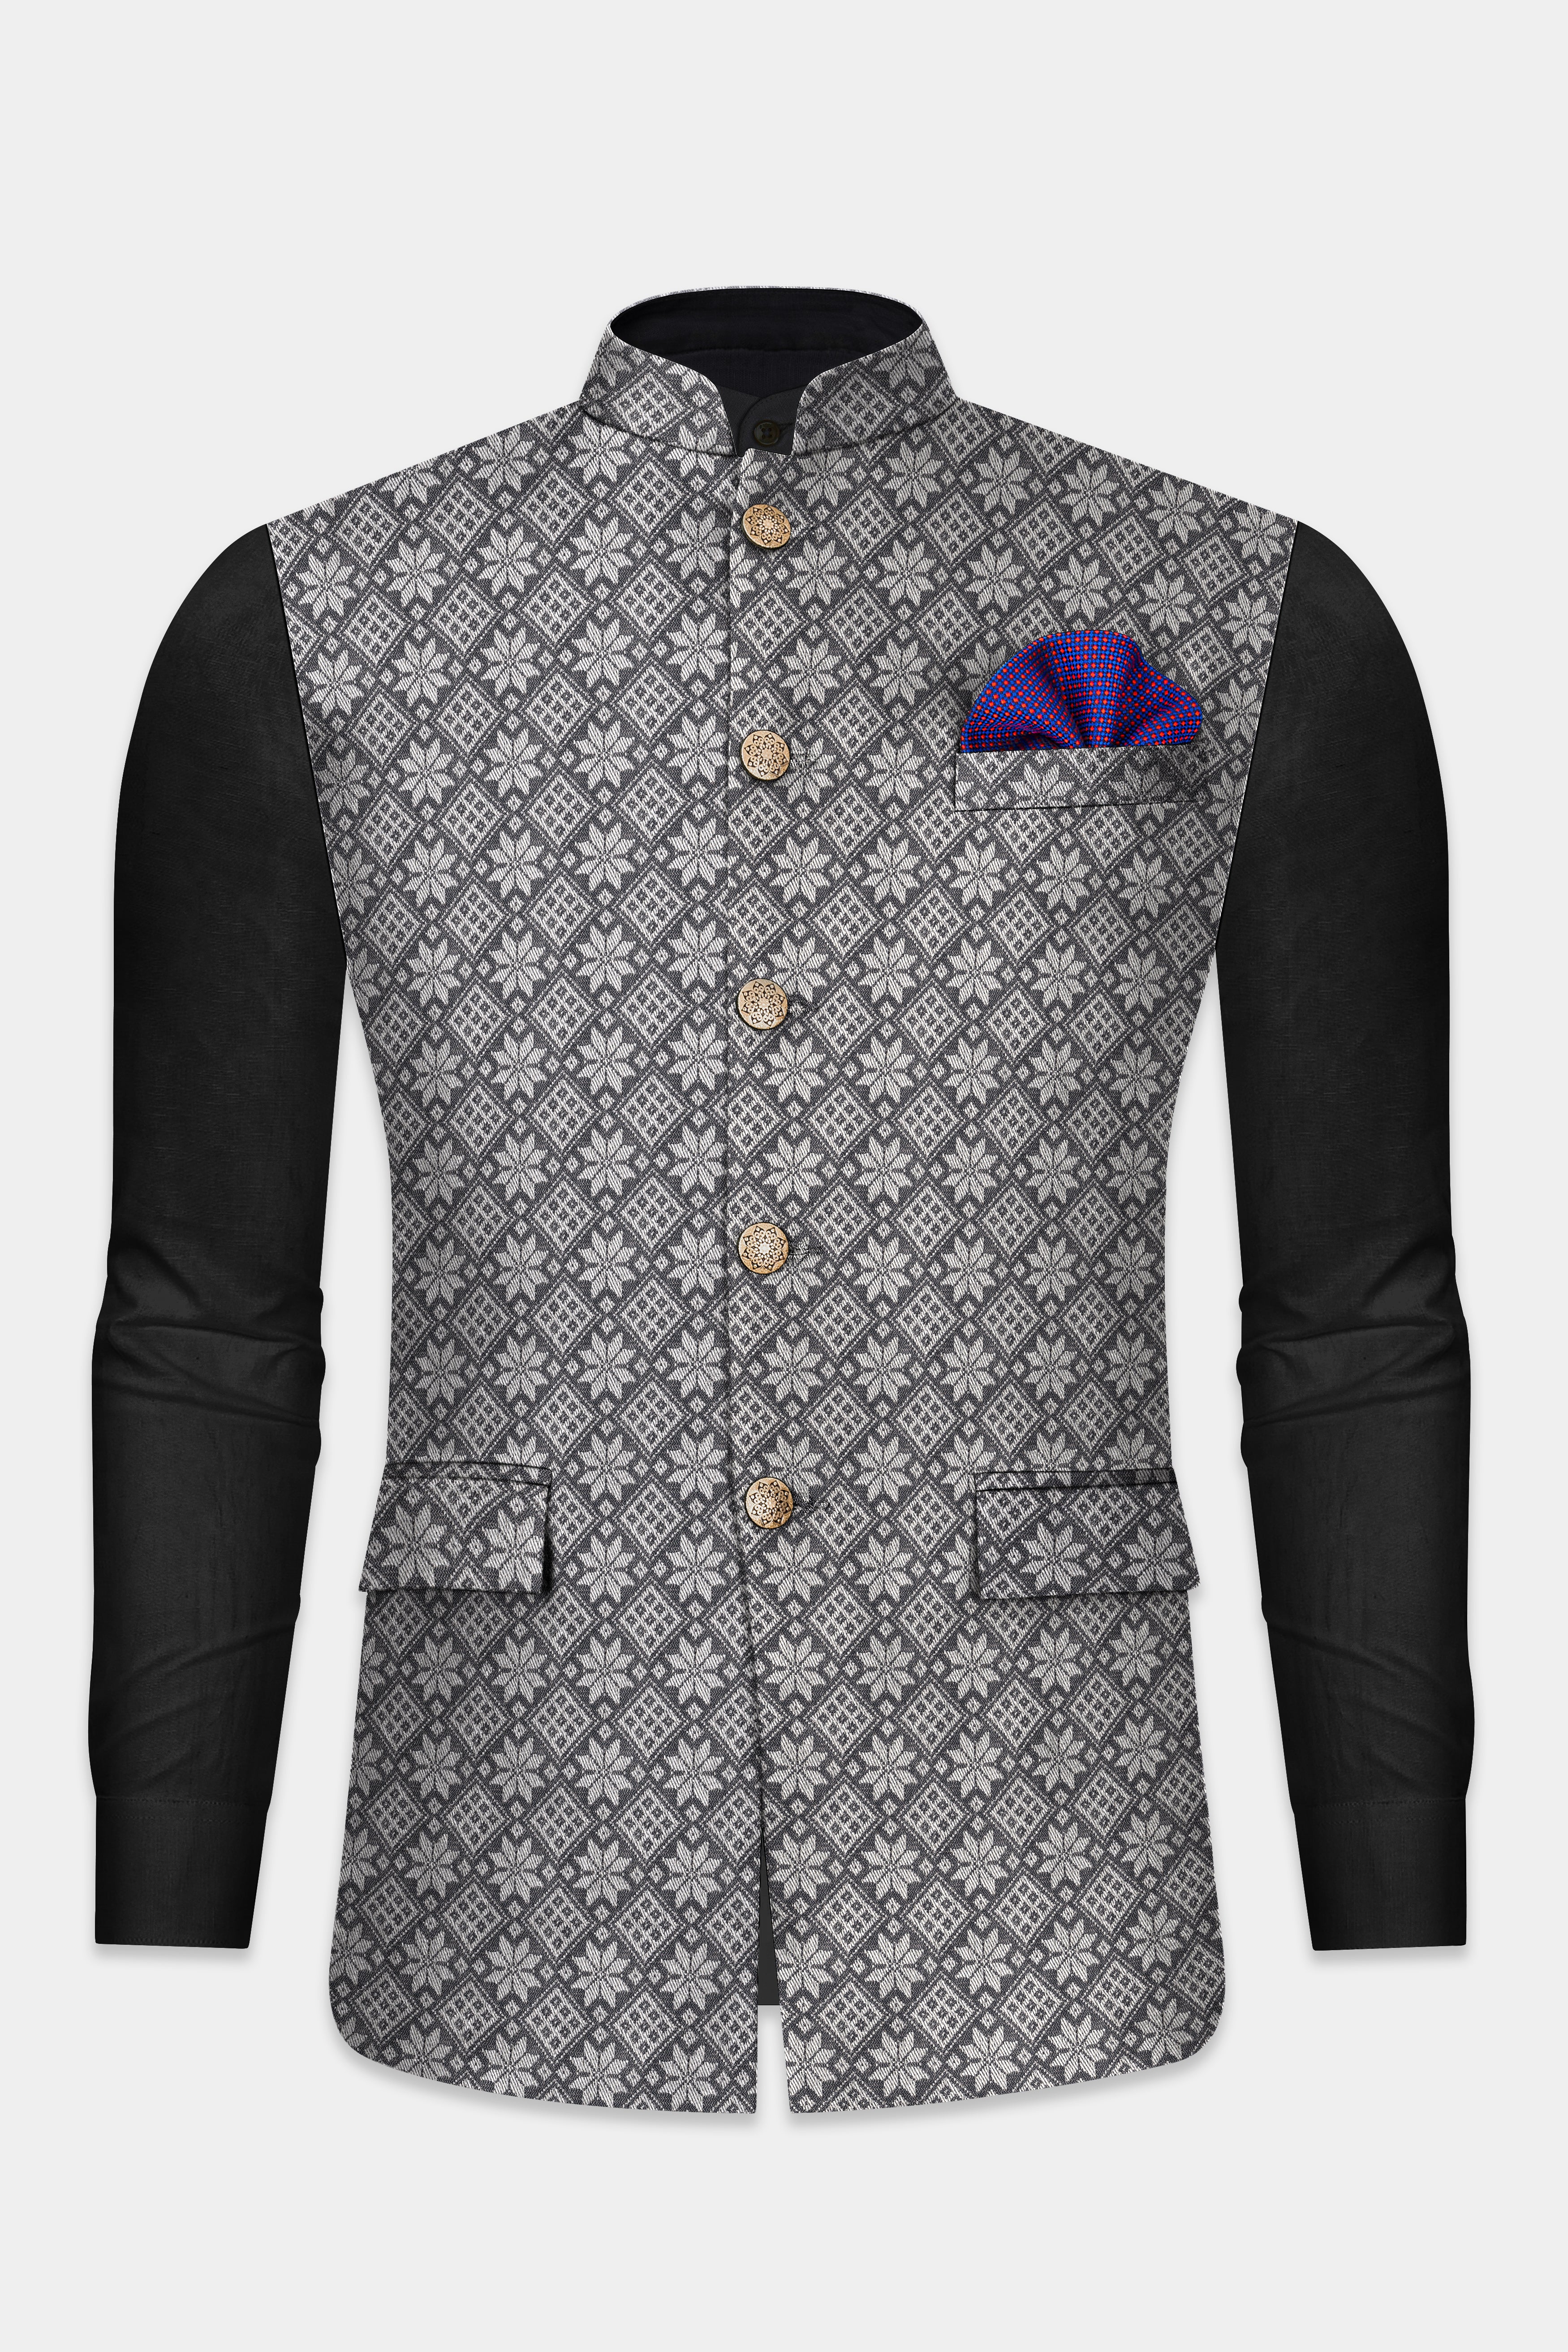 Ironside gray and Cement gray Floral Printed Nehru Jacket